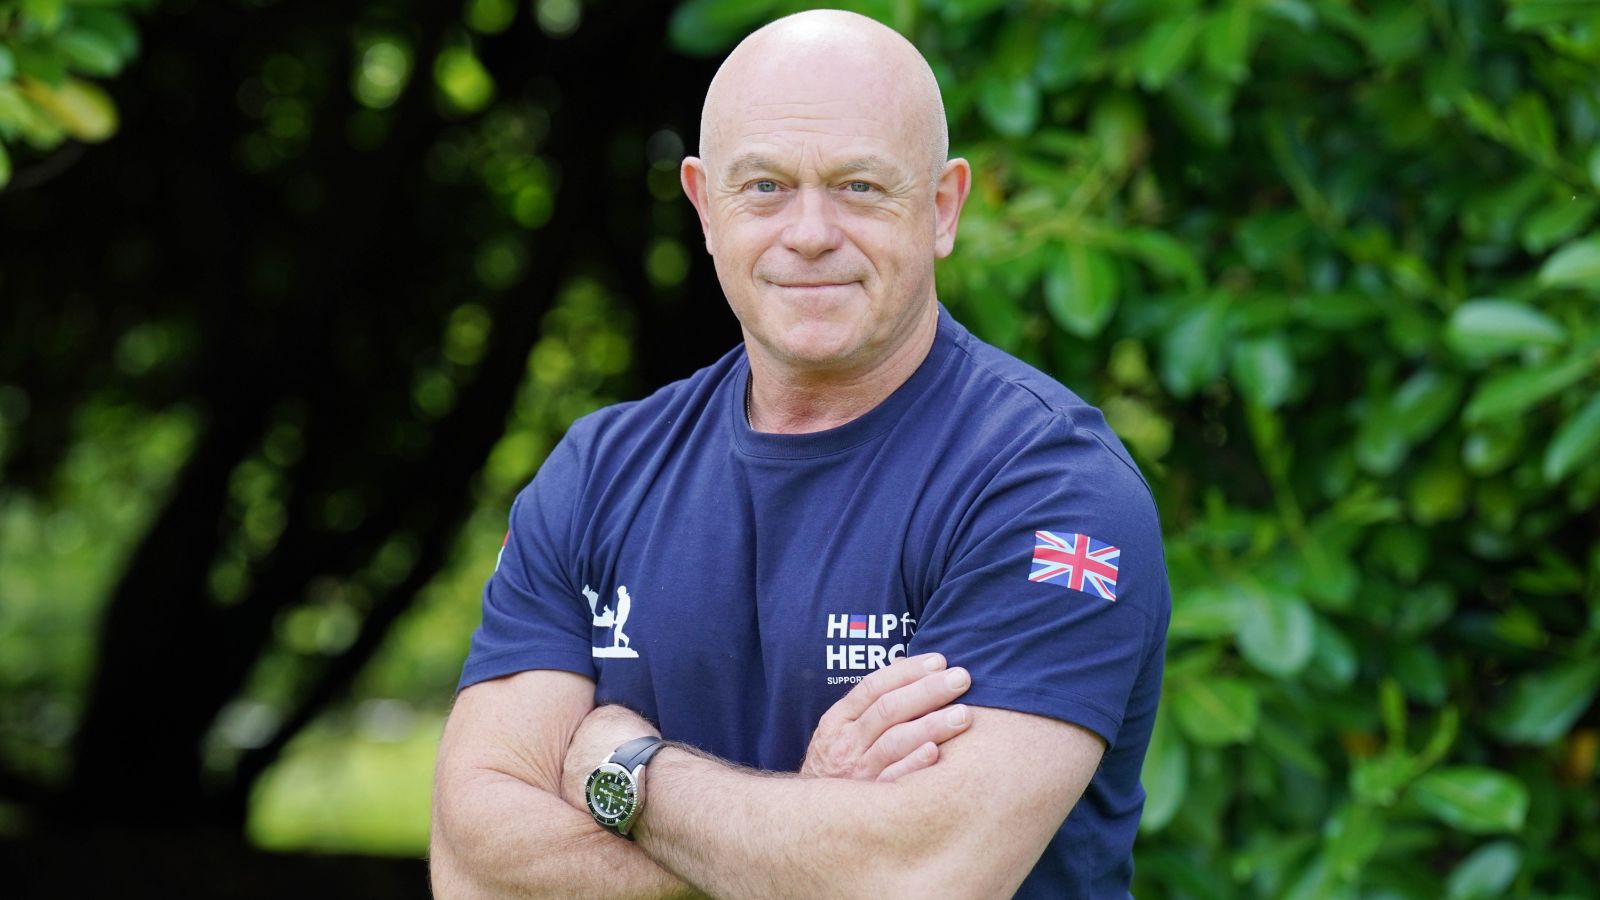 Ross Kemp on fatherhood, his love of Essex and famous career on screen